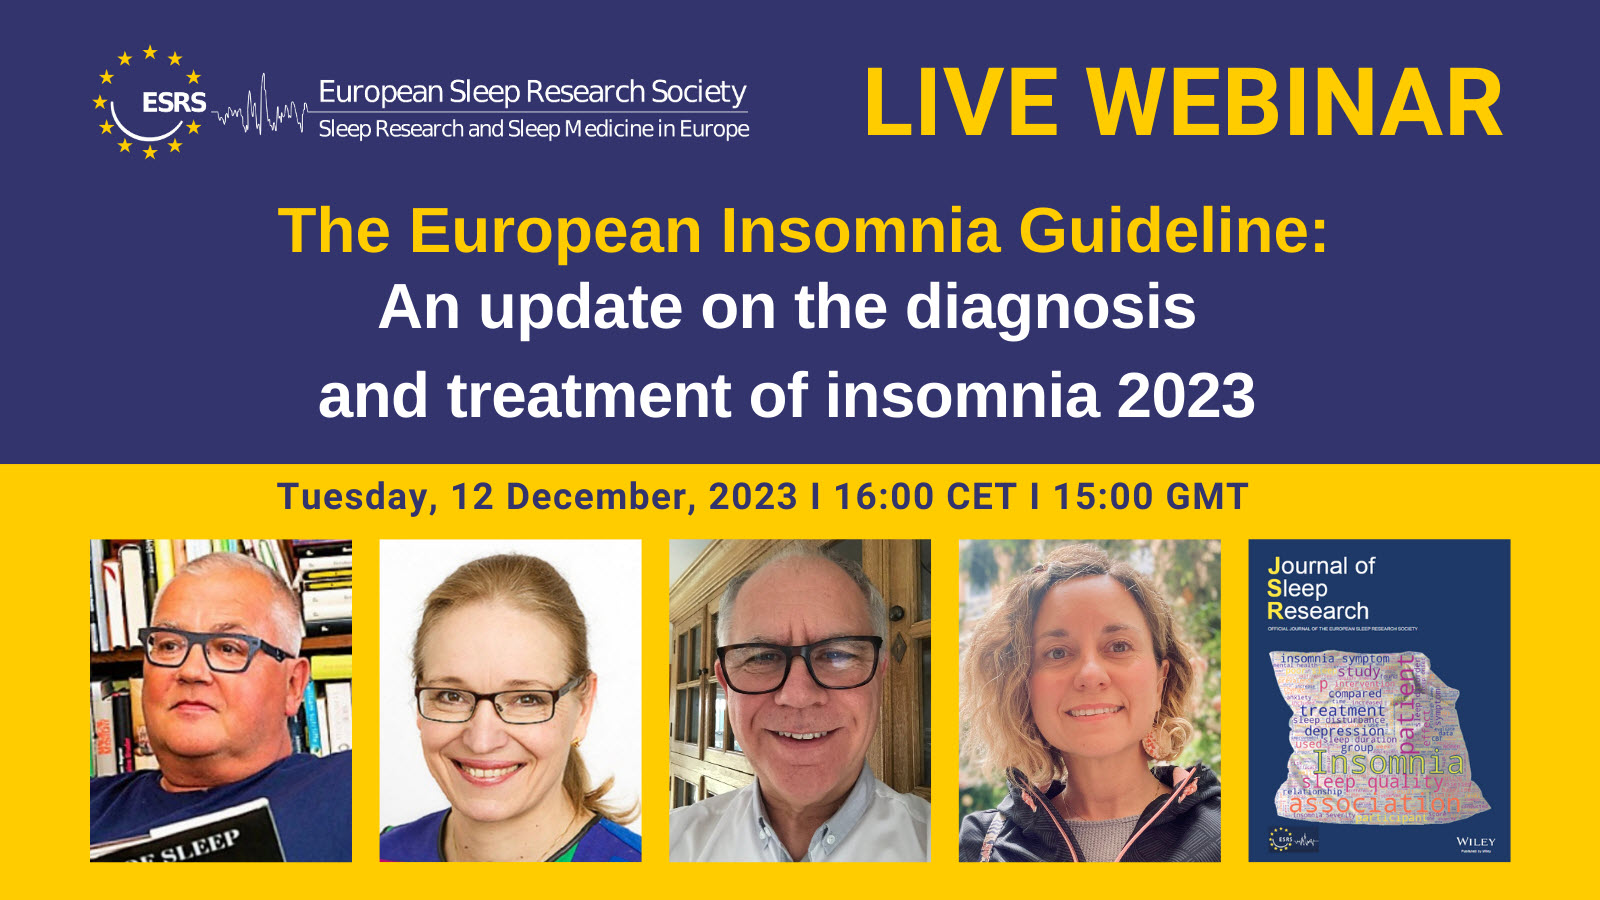 ESRS Webinar The European Insomnia Guideline An Update on the Diagnosis and Treatment of Insomnia 2023